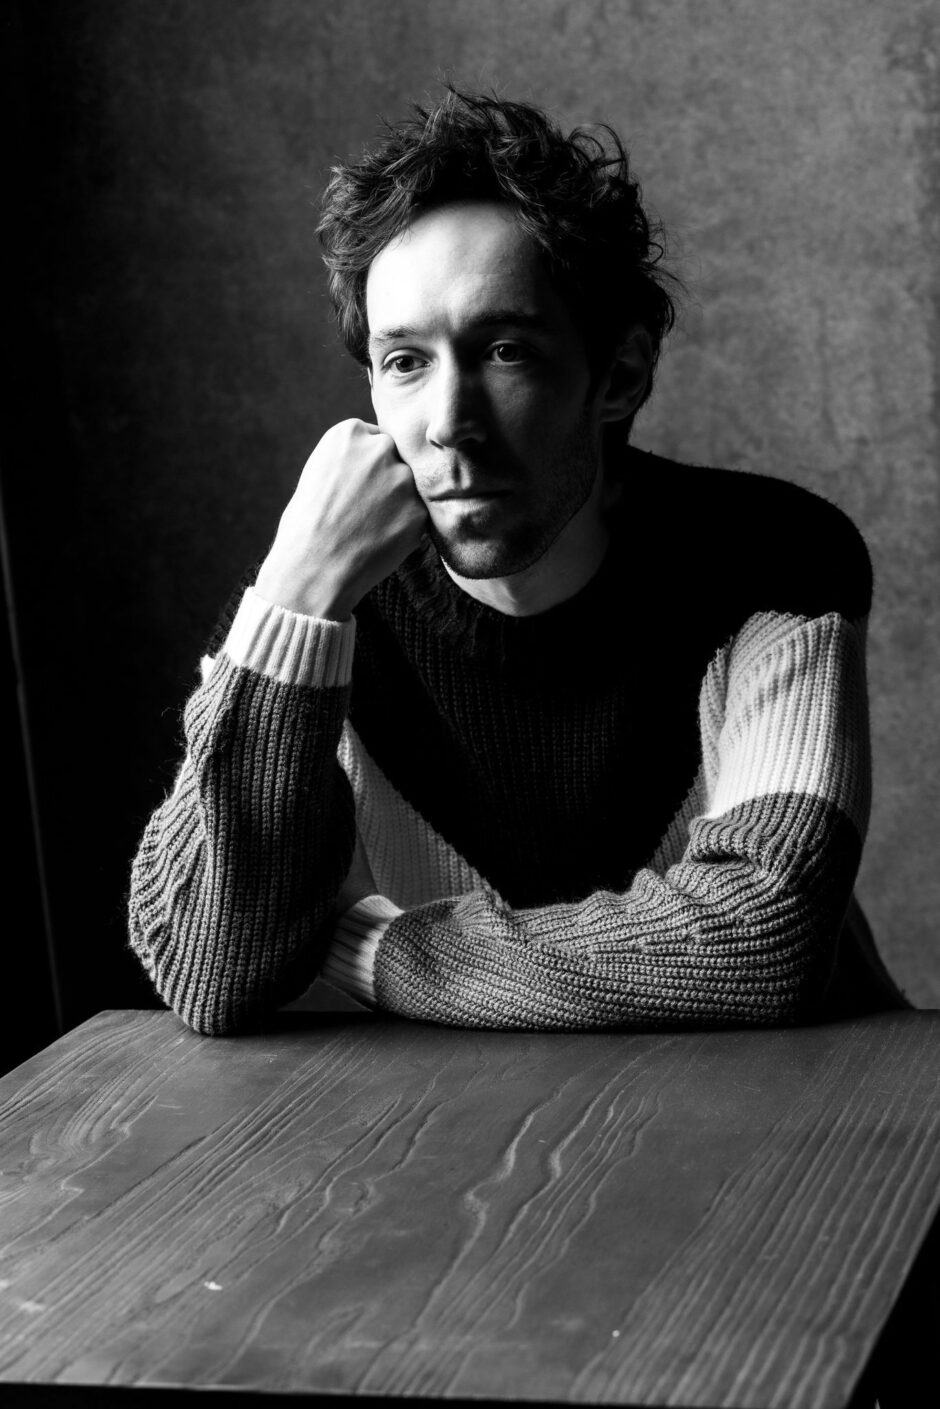 A black and white portrait of Creagen Dow sitting at a wooden table, resting his chin on his fist. He has tousled hair and is wearing a knitted sweater with contrasting colors. His expression is thoughtful and introspective, and the lighting highlights the textures of his sweater and the table's grain. The background is a plain, dark wall.